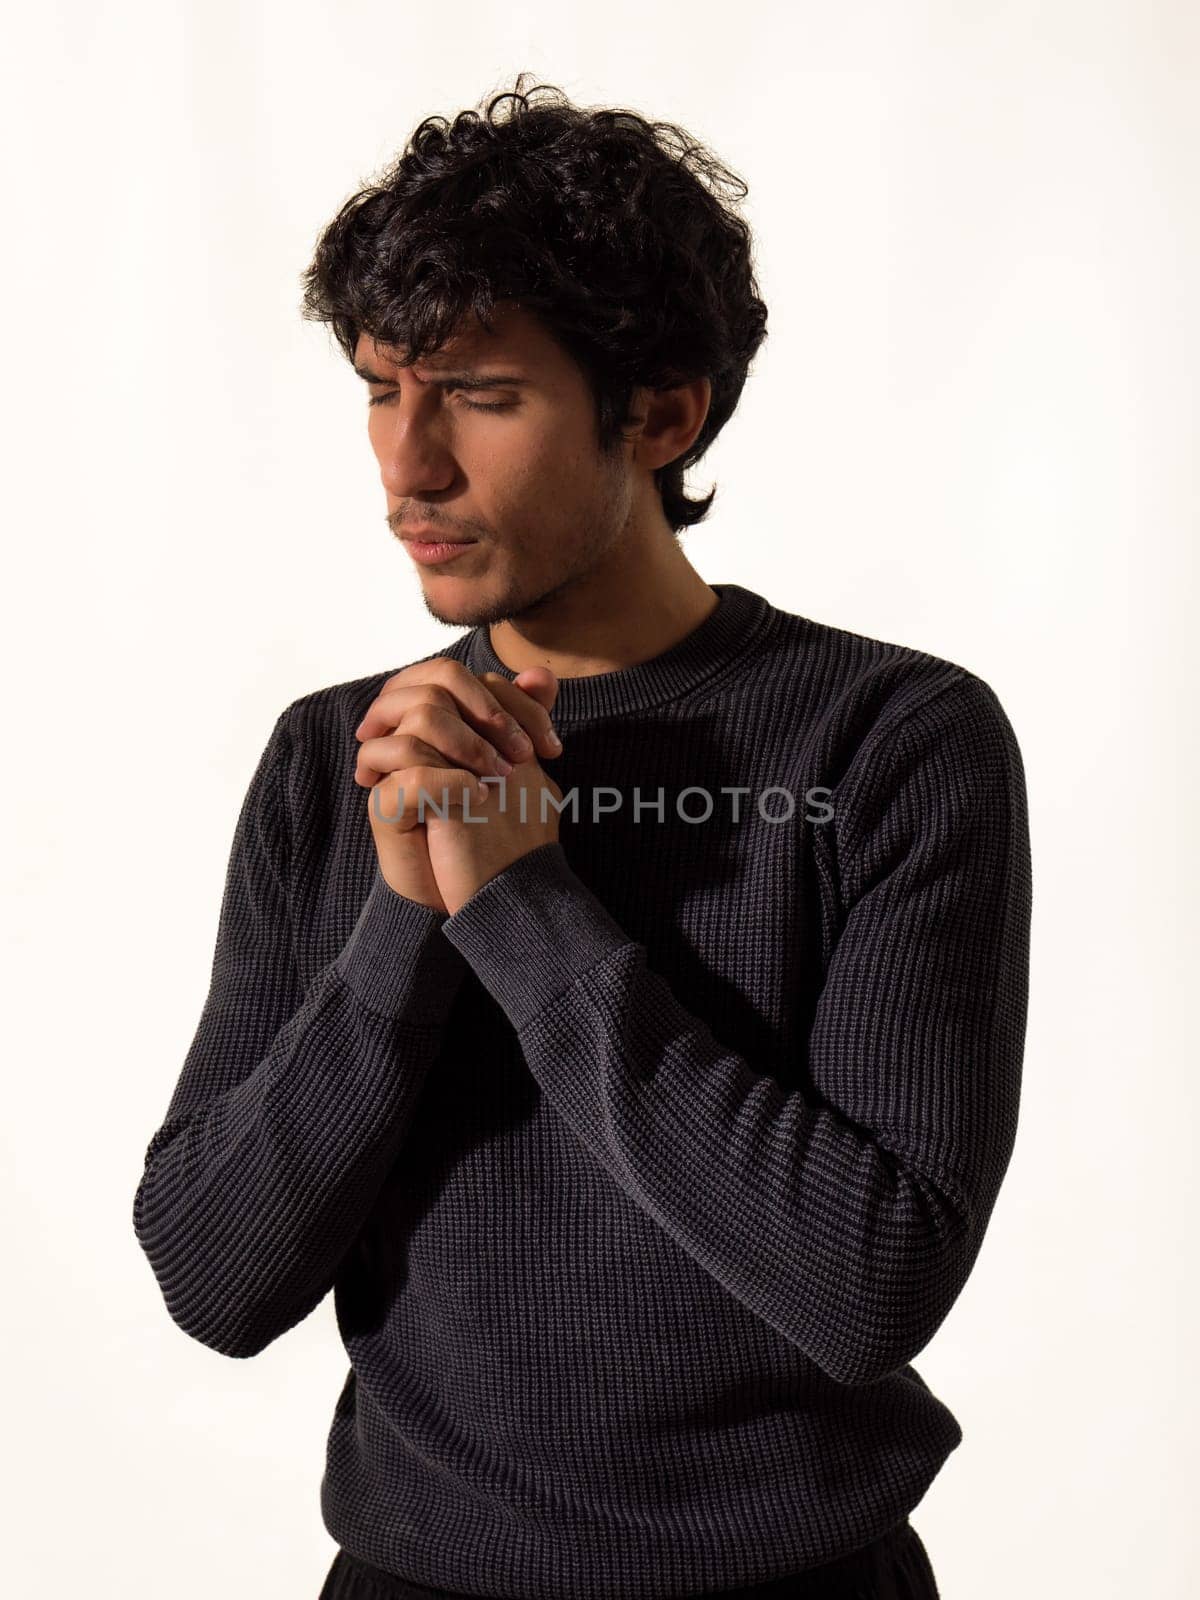 A young handsome man in a black sweater is praying, holding his hands joined together, isolated on white in studio